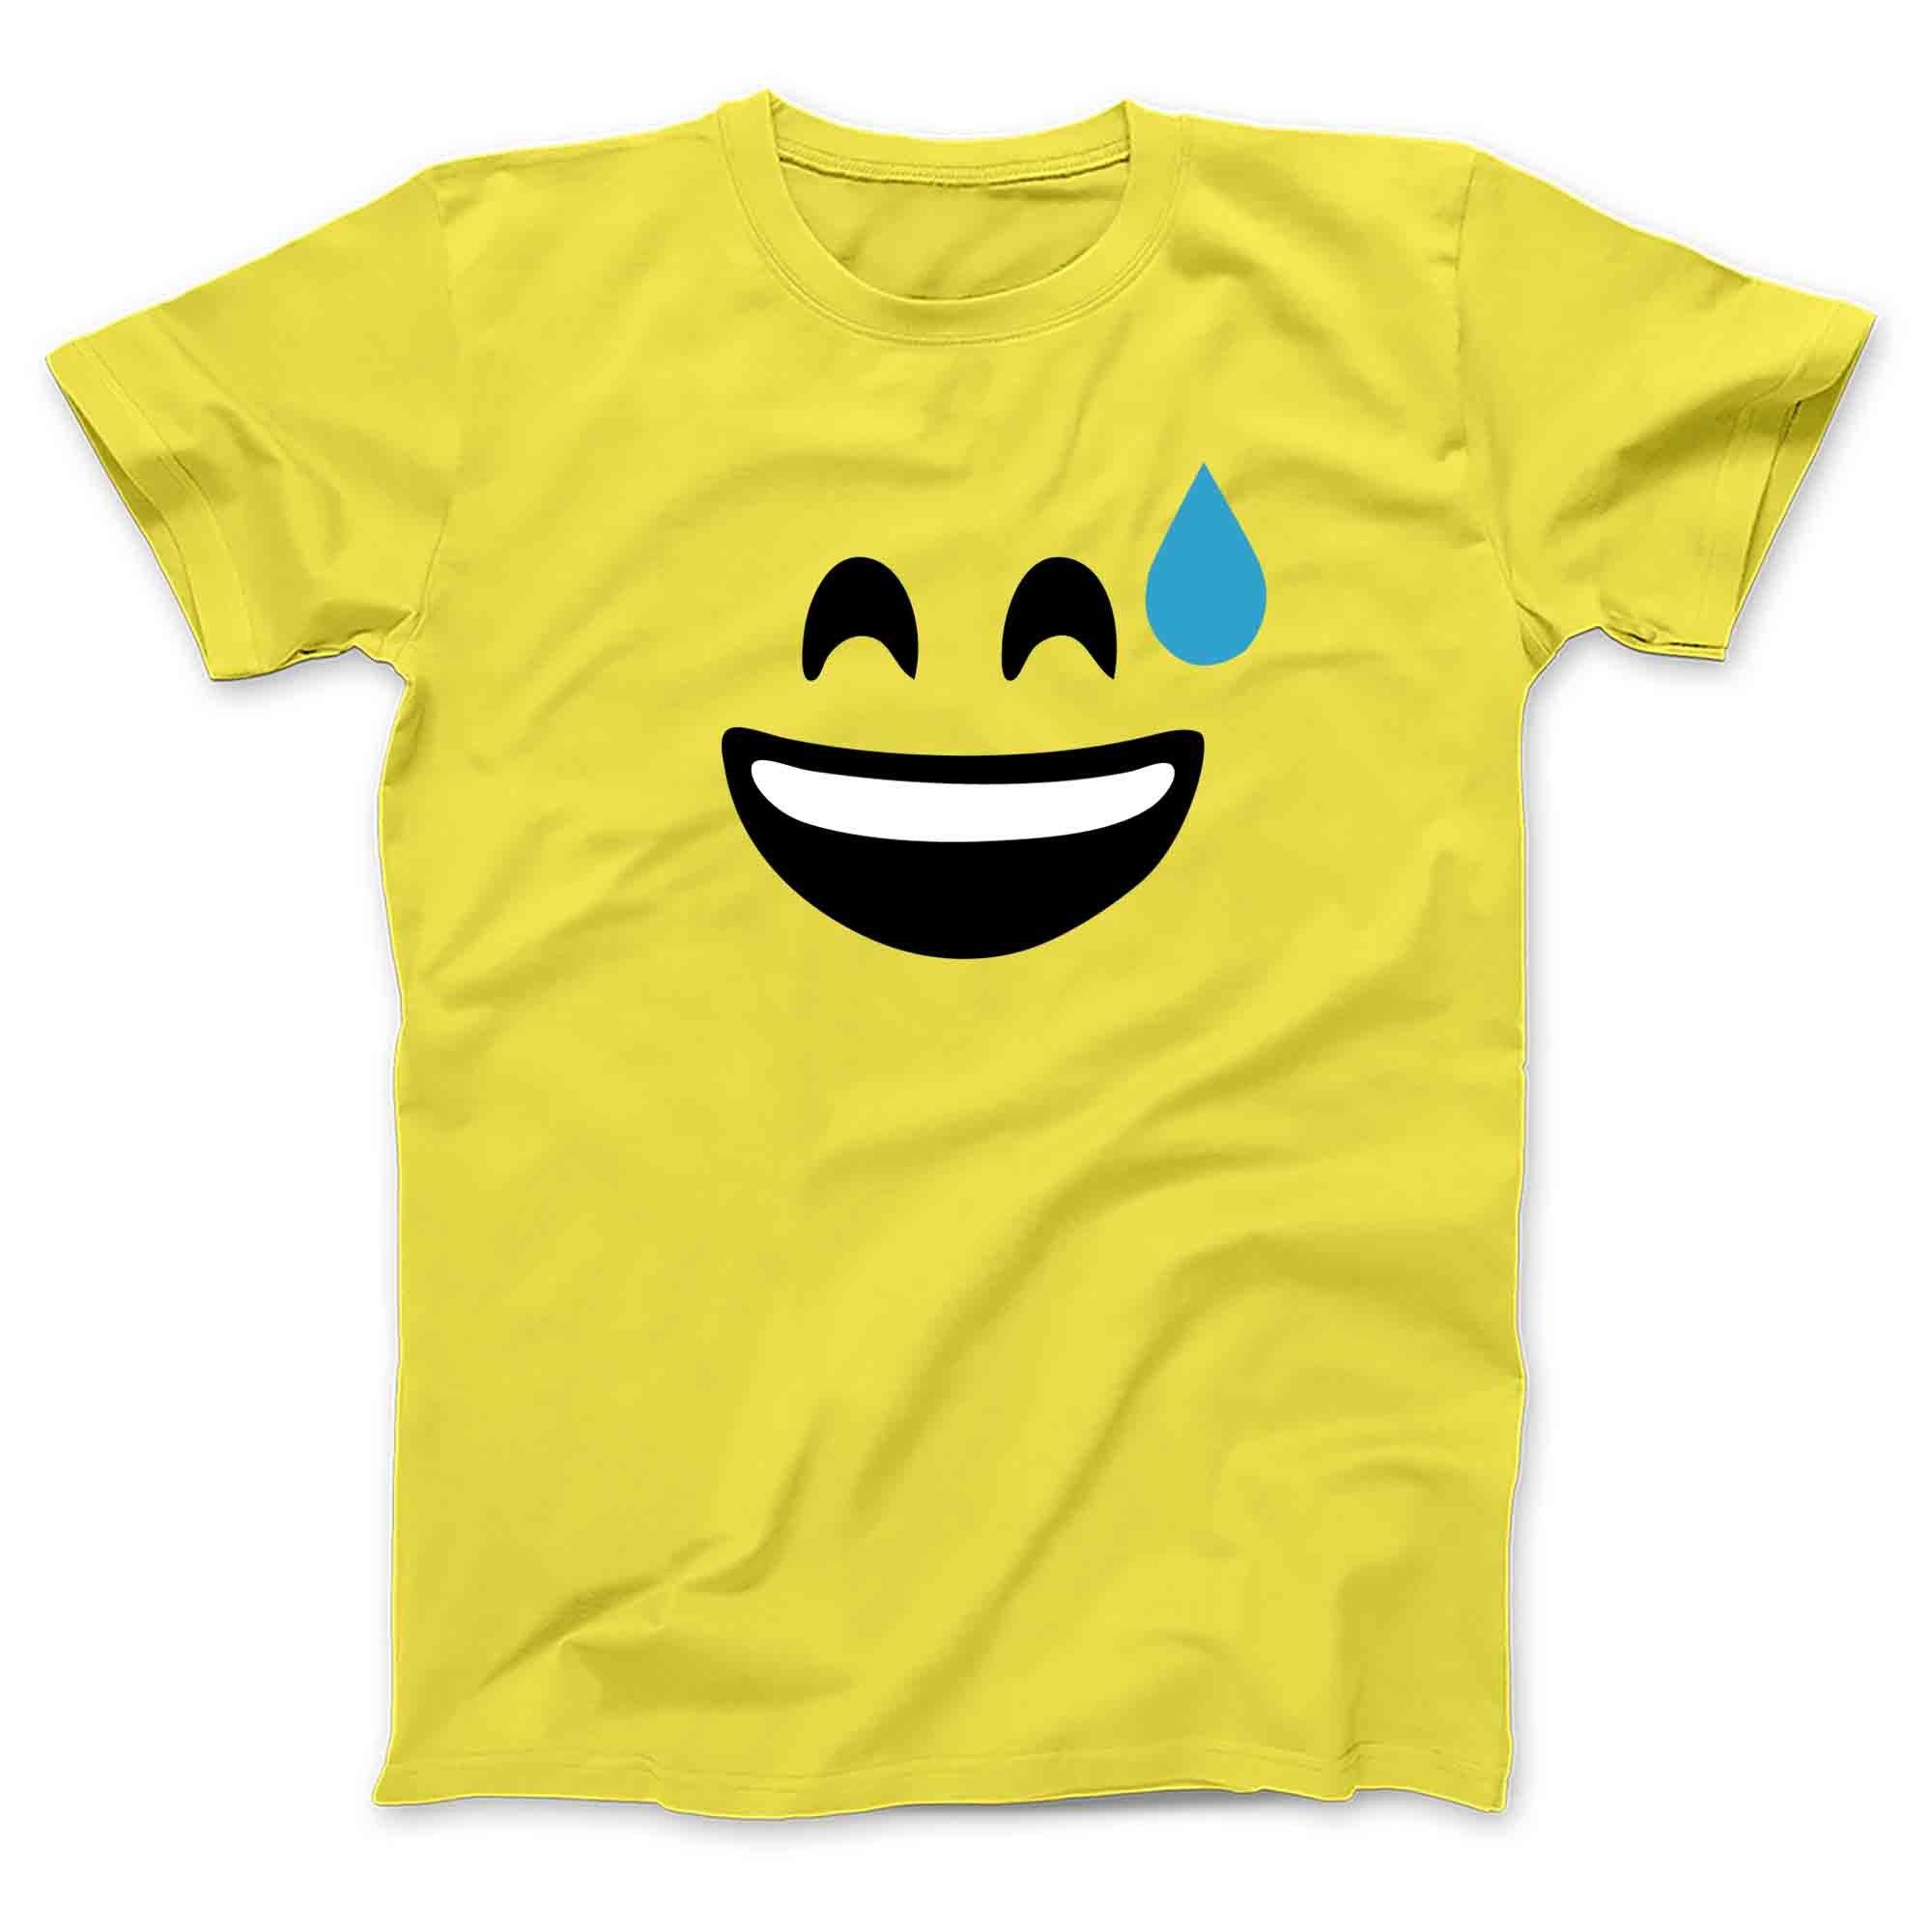 Smiley faces wink heart emoji - size xs